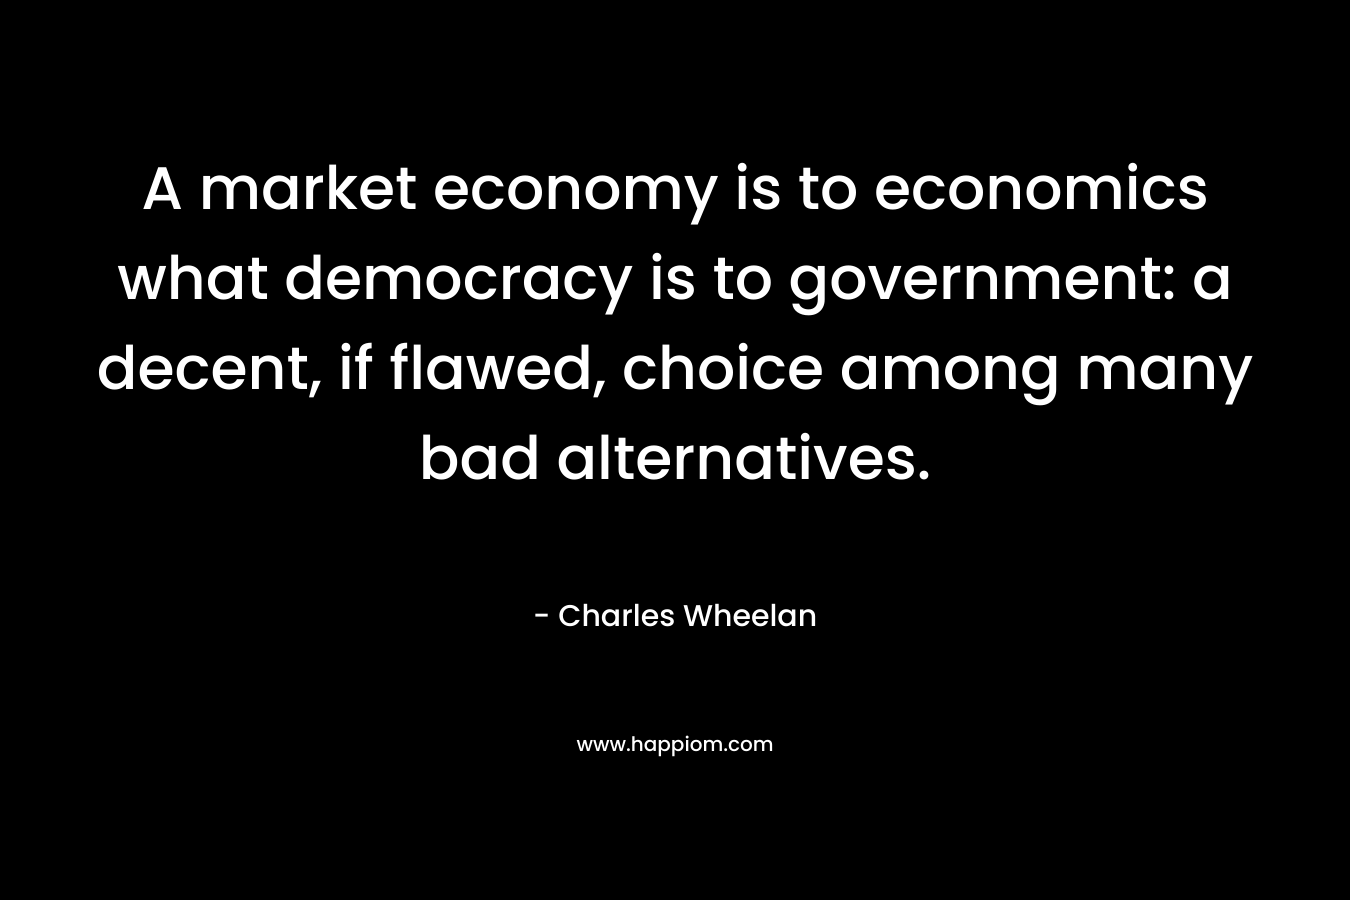 A market economy is to economics what democracy is to government: a decent, if flawed, choice among many bad alternatives.